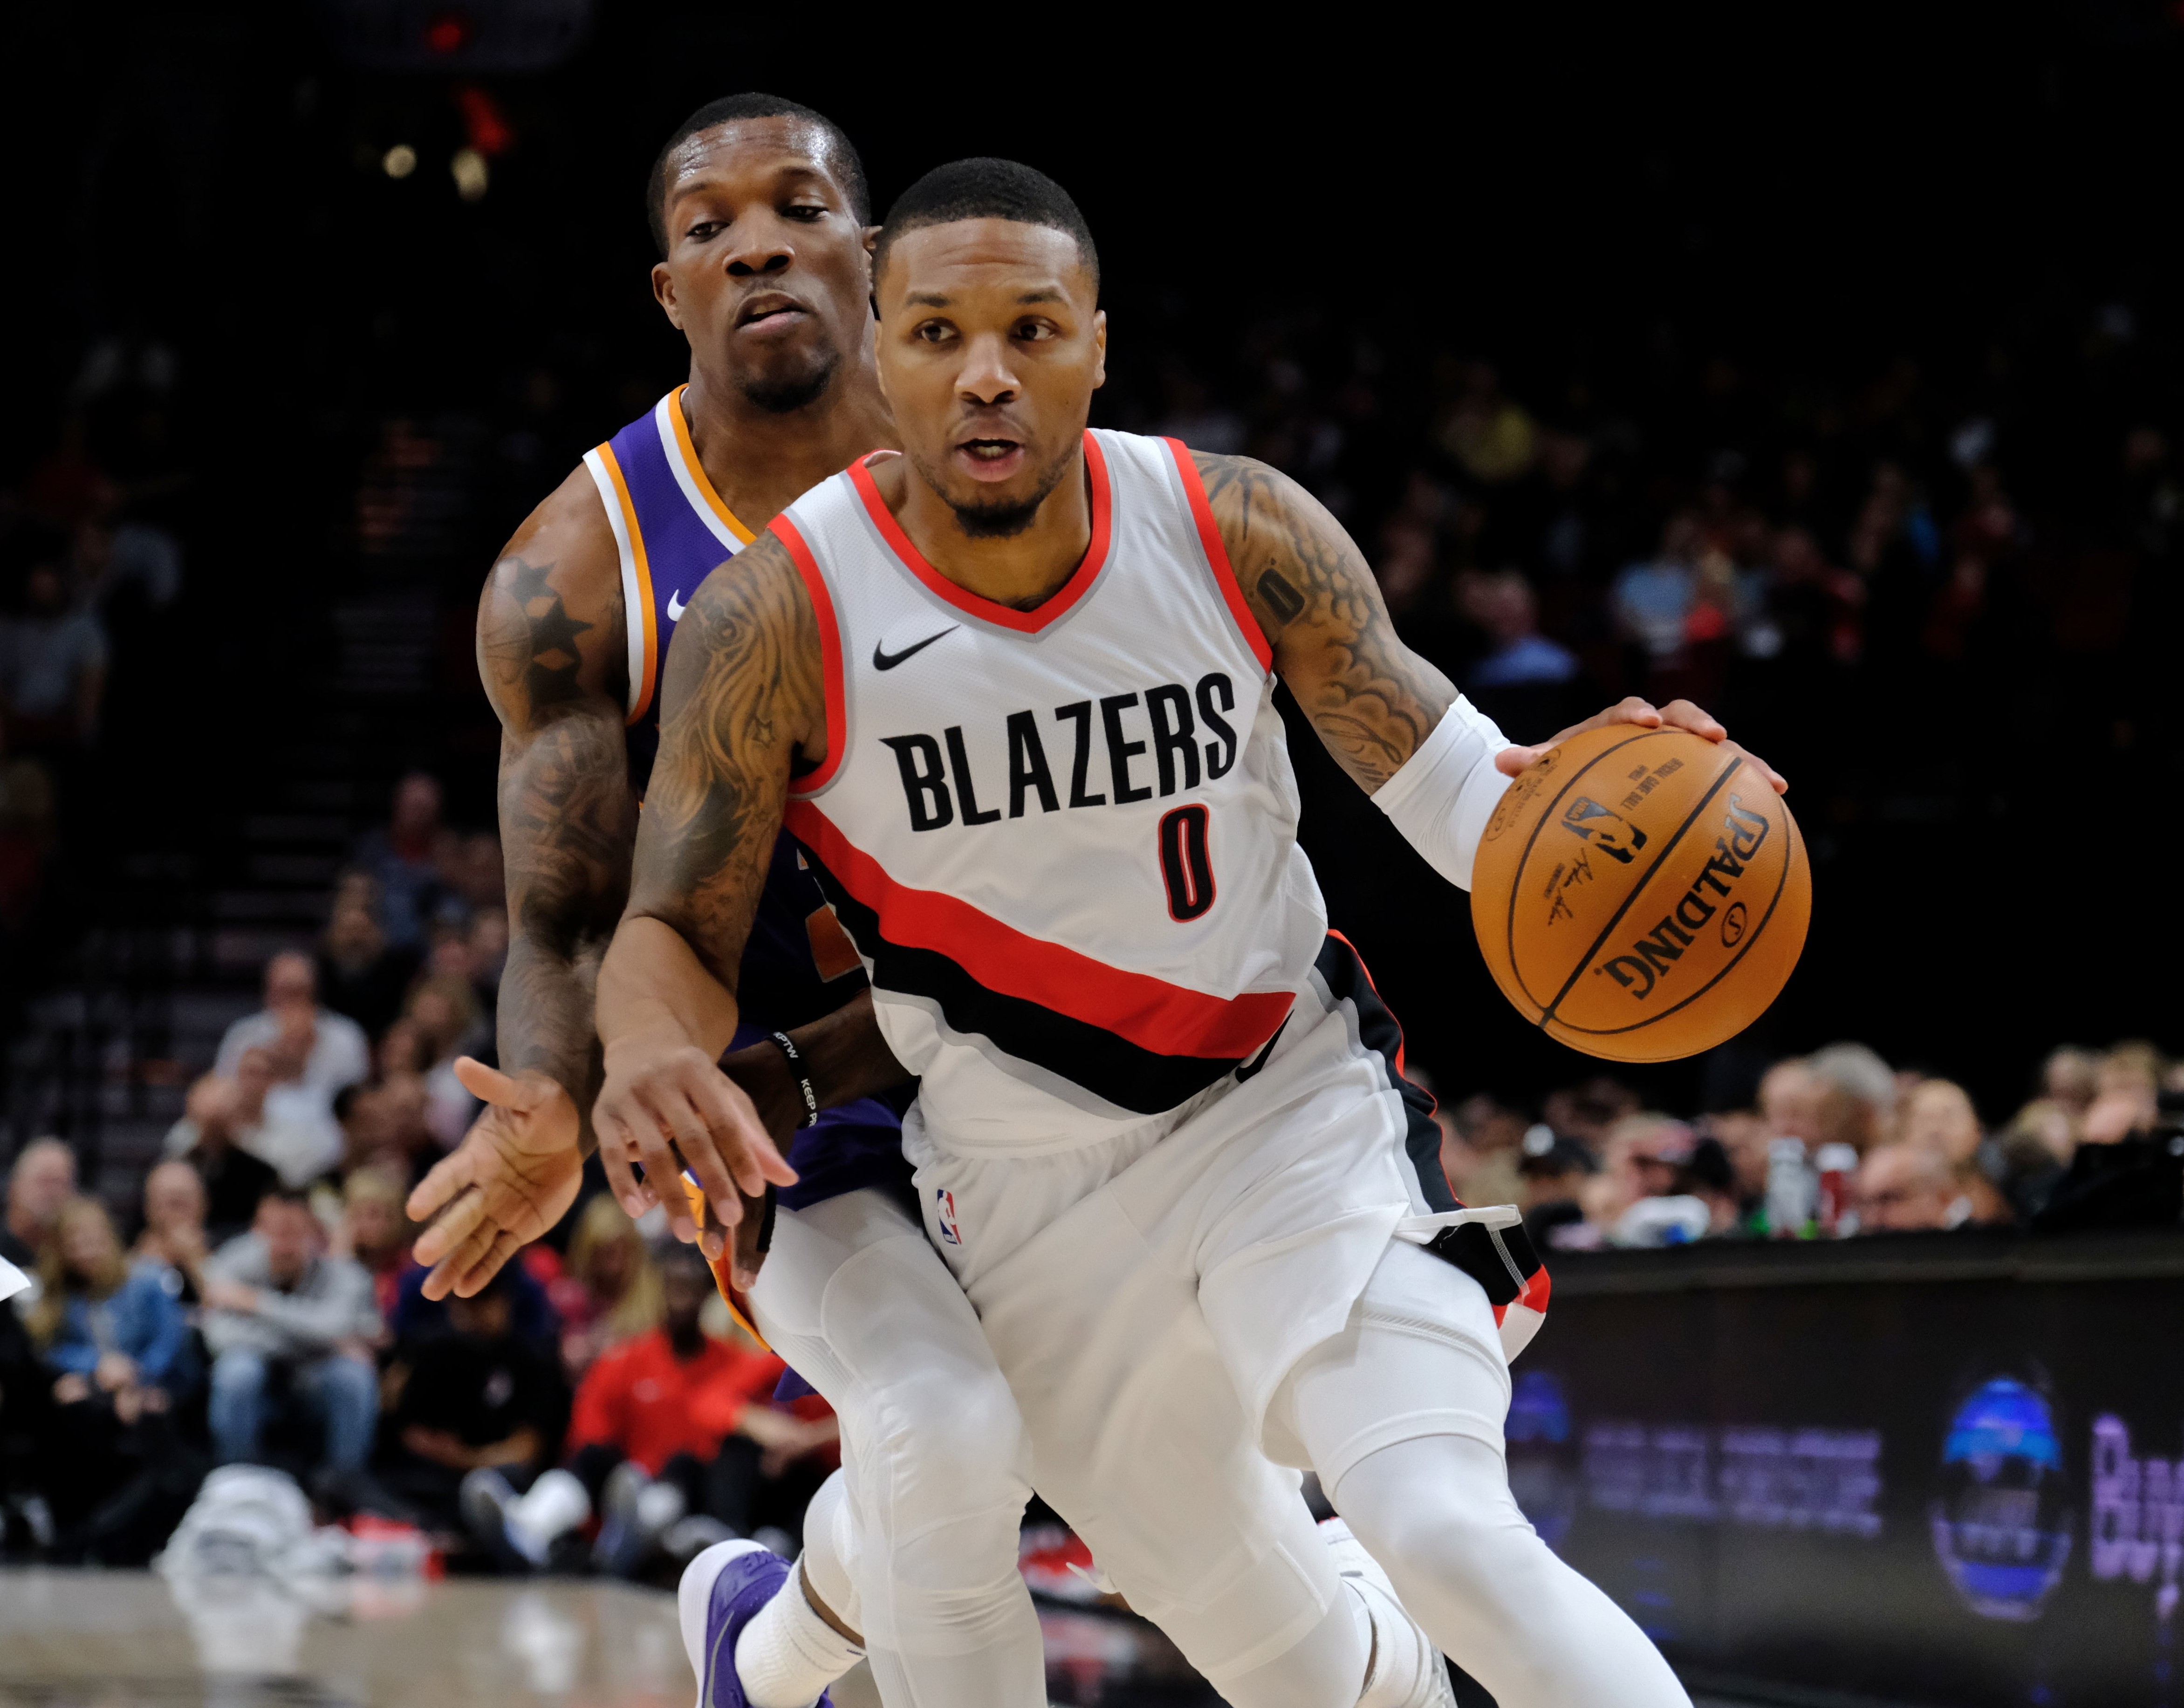 Damian Lillard Claims He’s Finished With Raiders After Blowout Loss